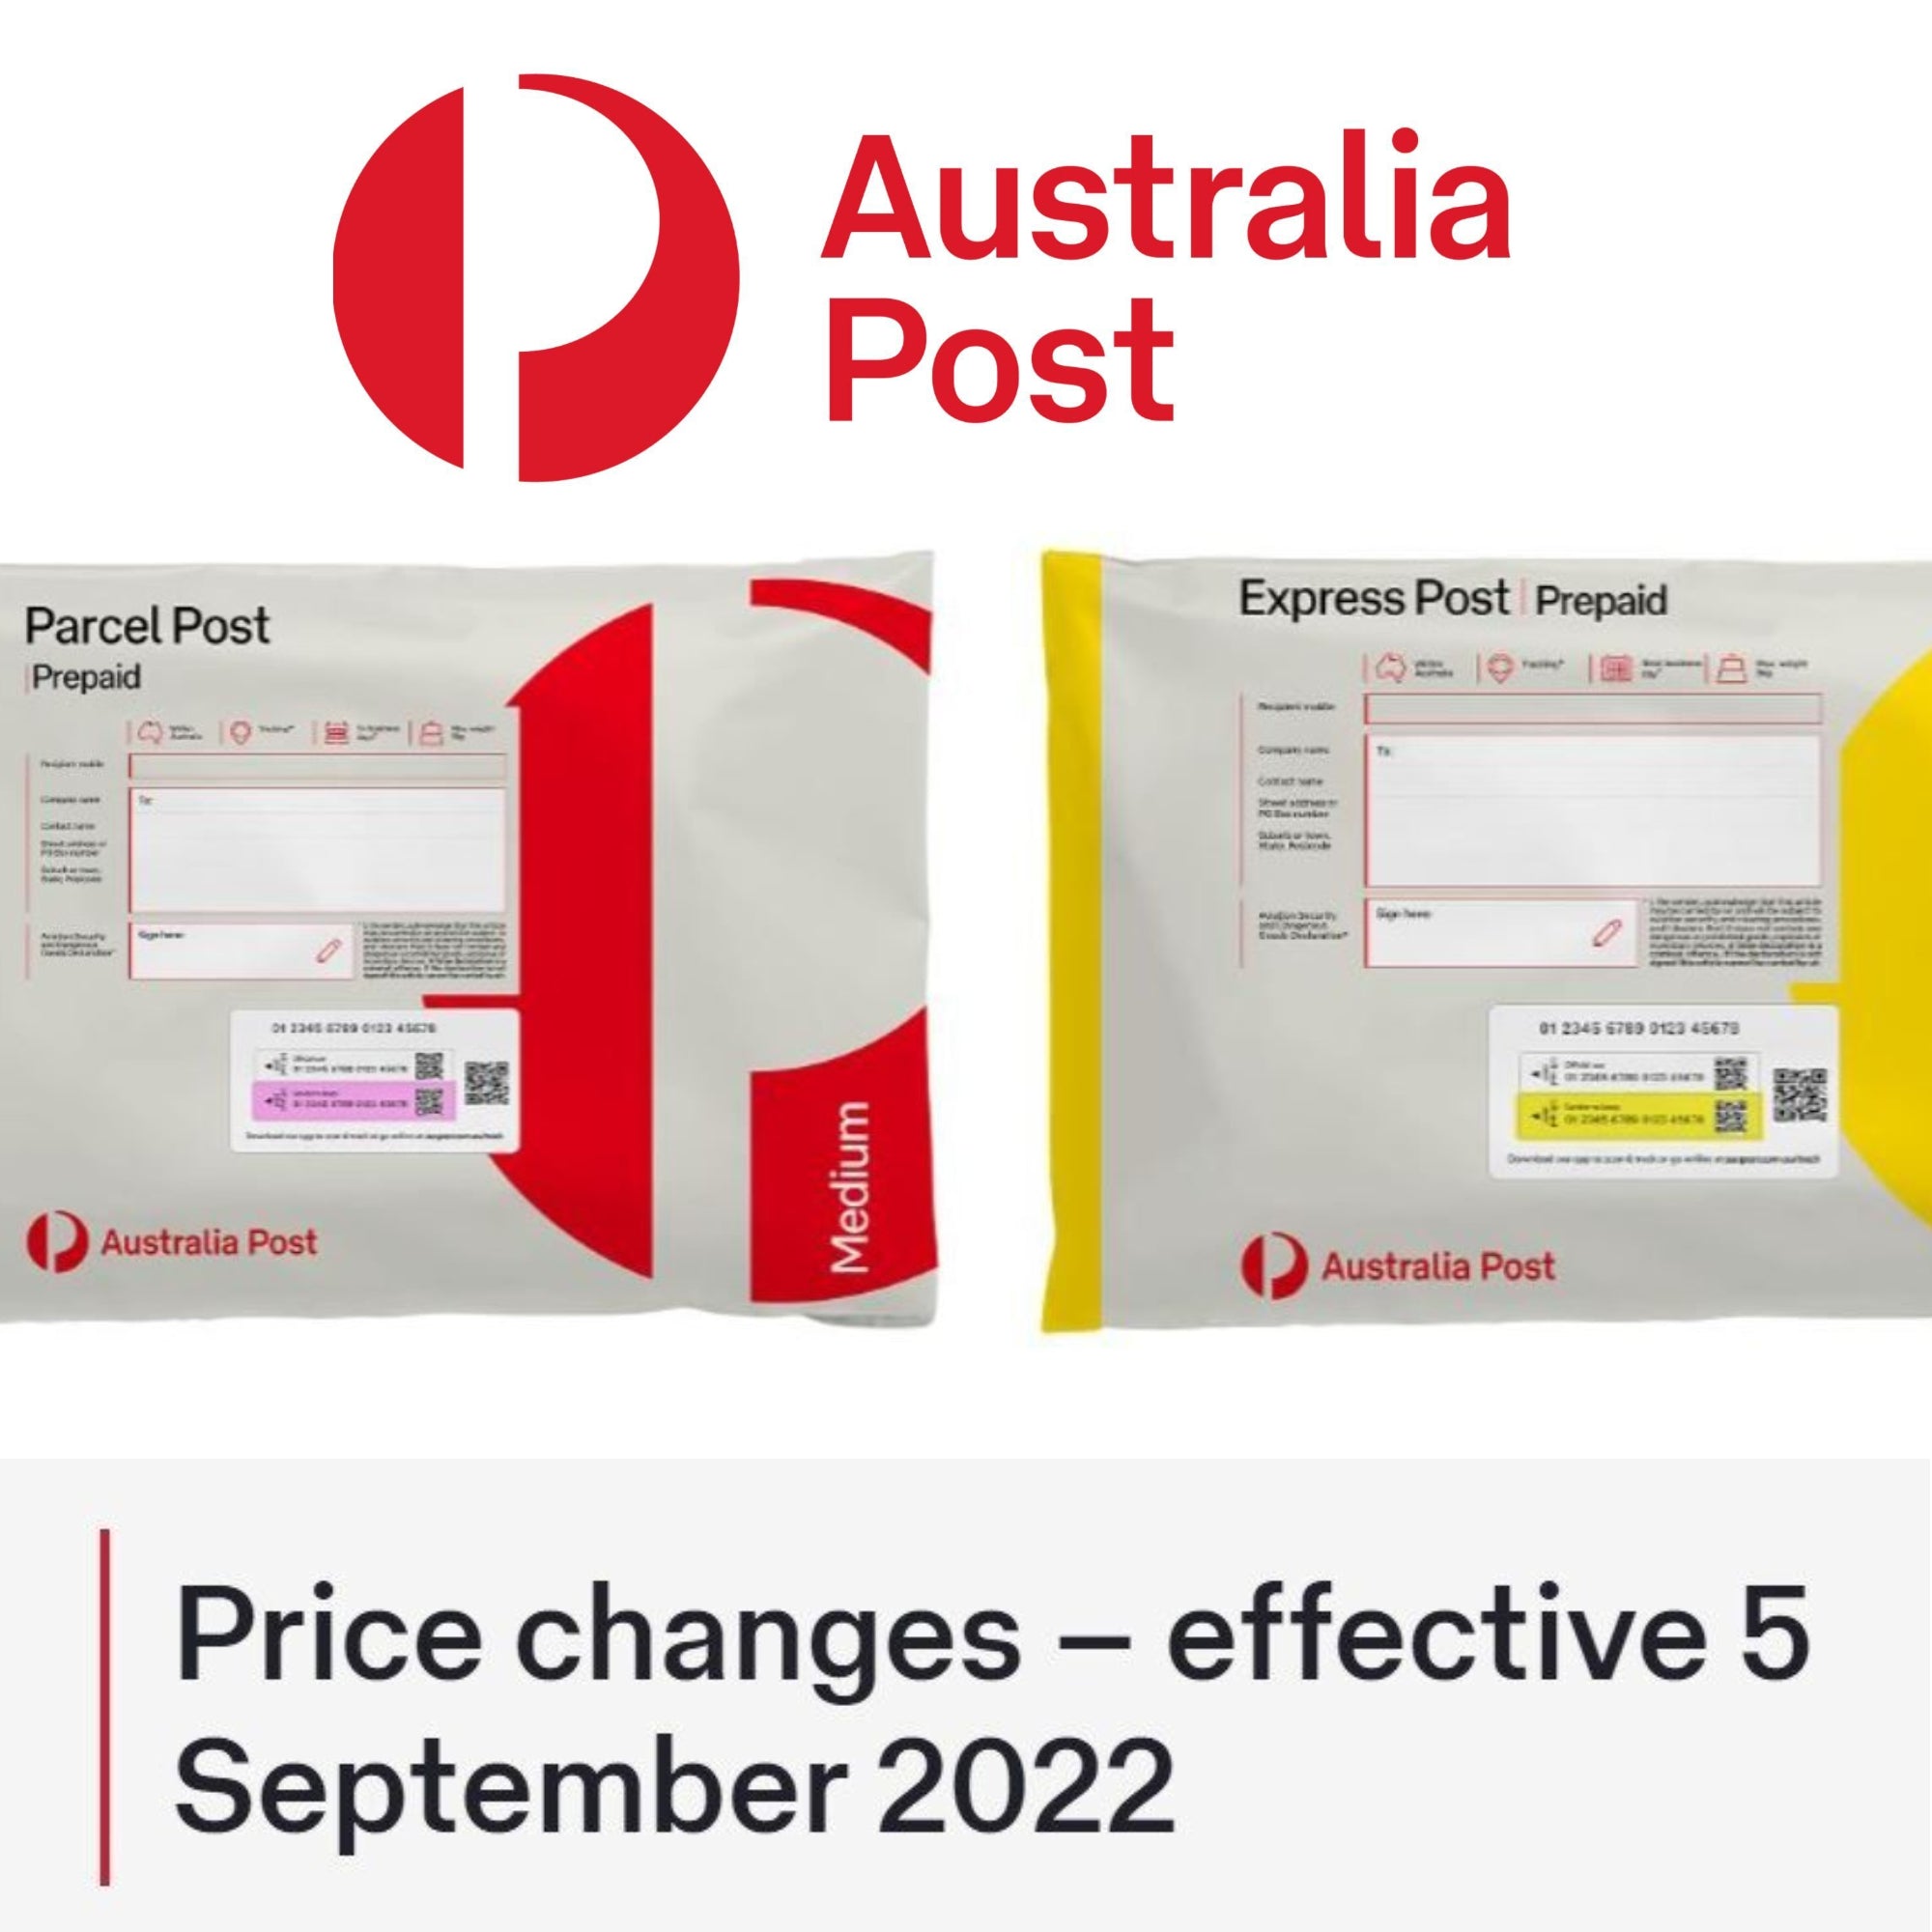 Australia Post Prices Changes for Prepaid Parcel Post and Express Post Satchels – Effective 5th September 2022